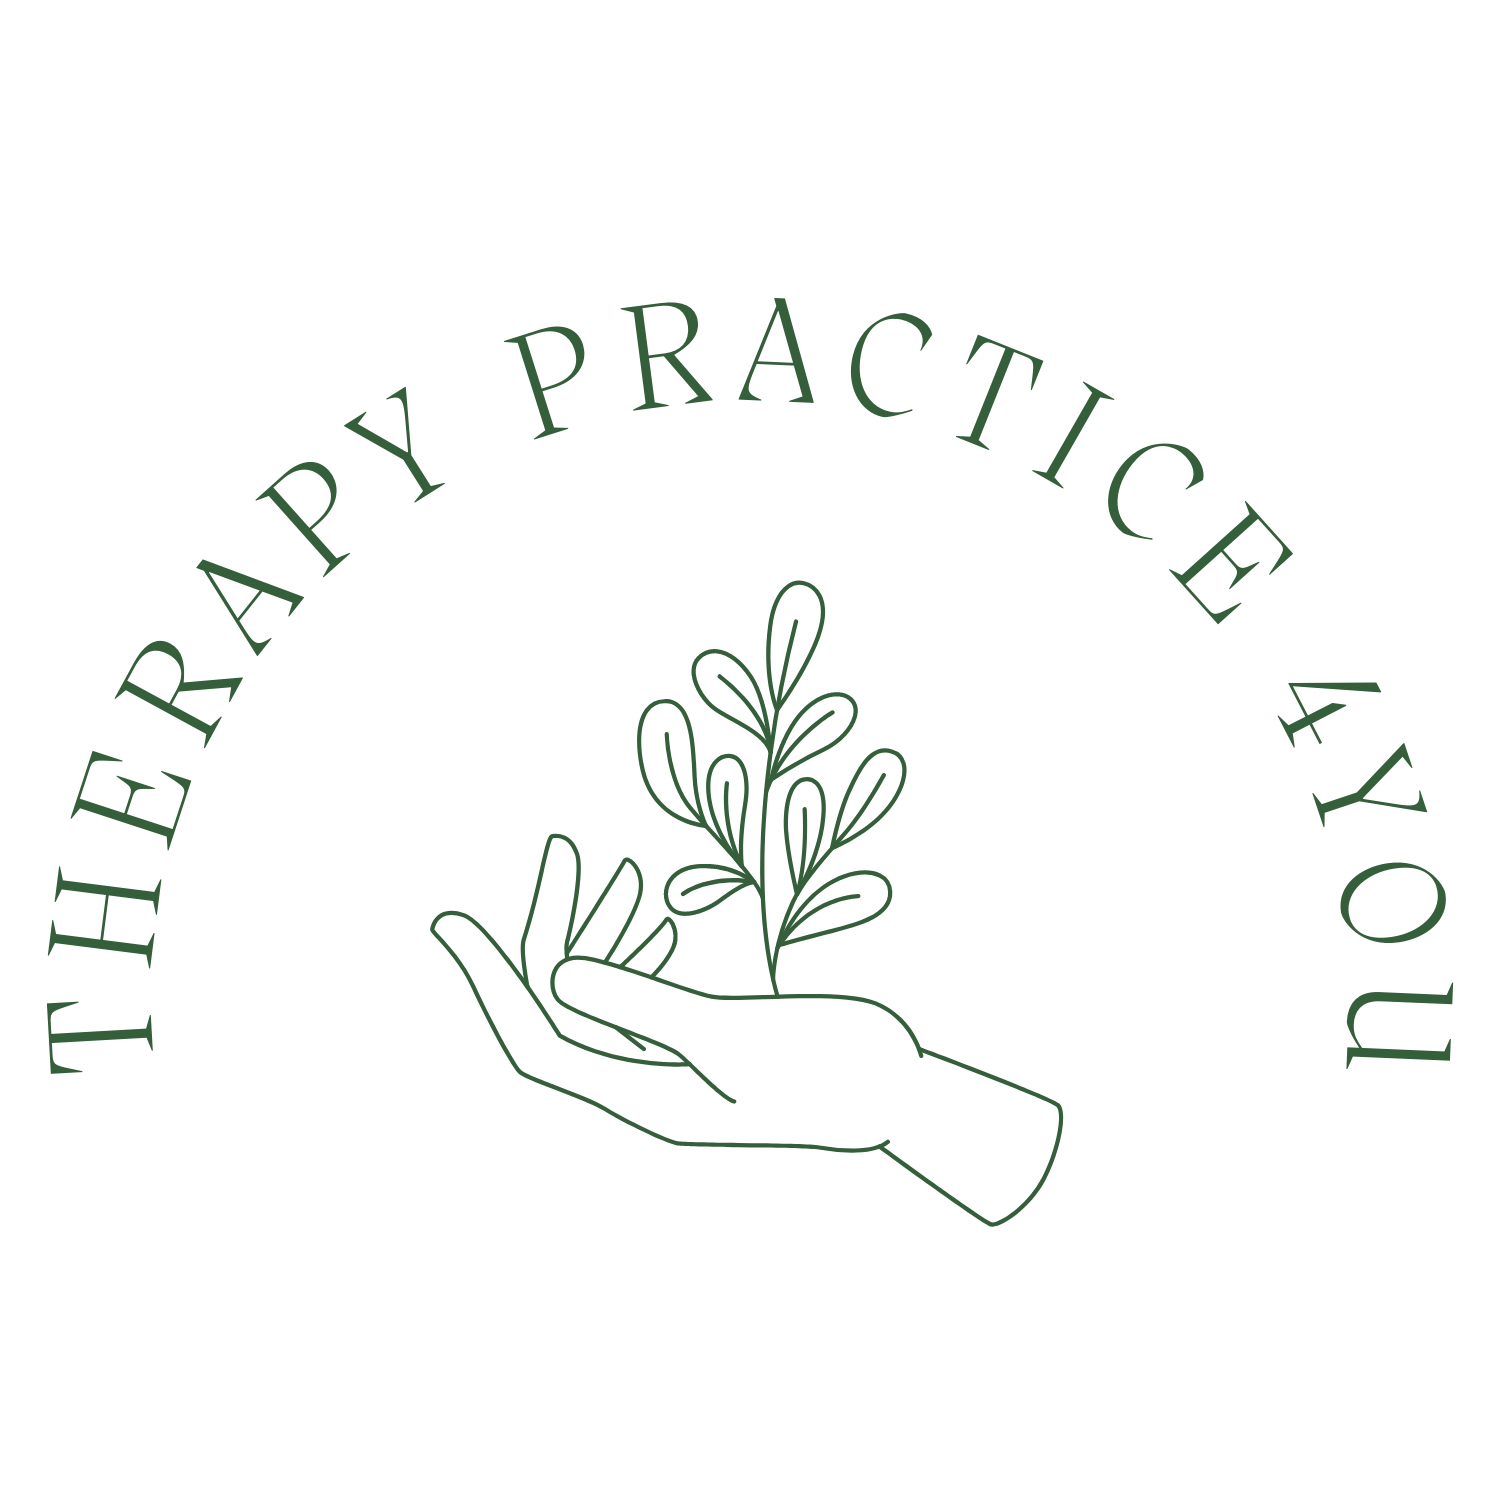 Therapy Practice 4u